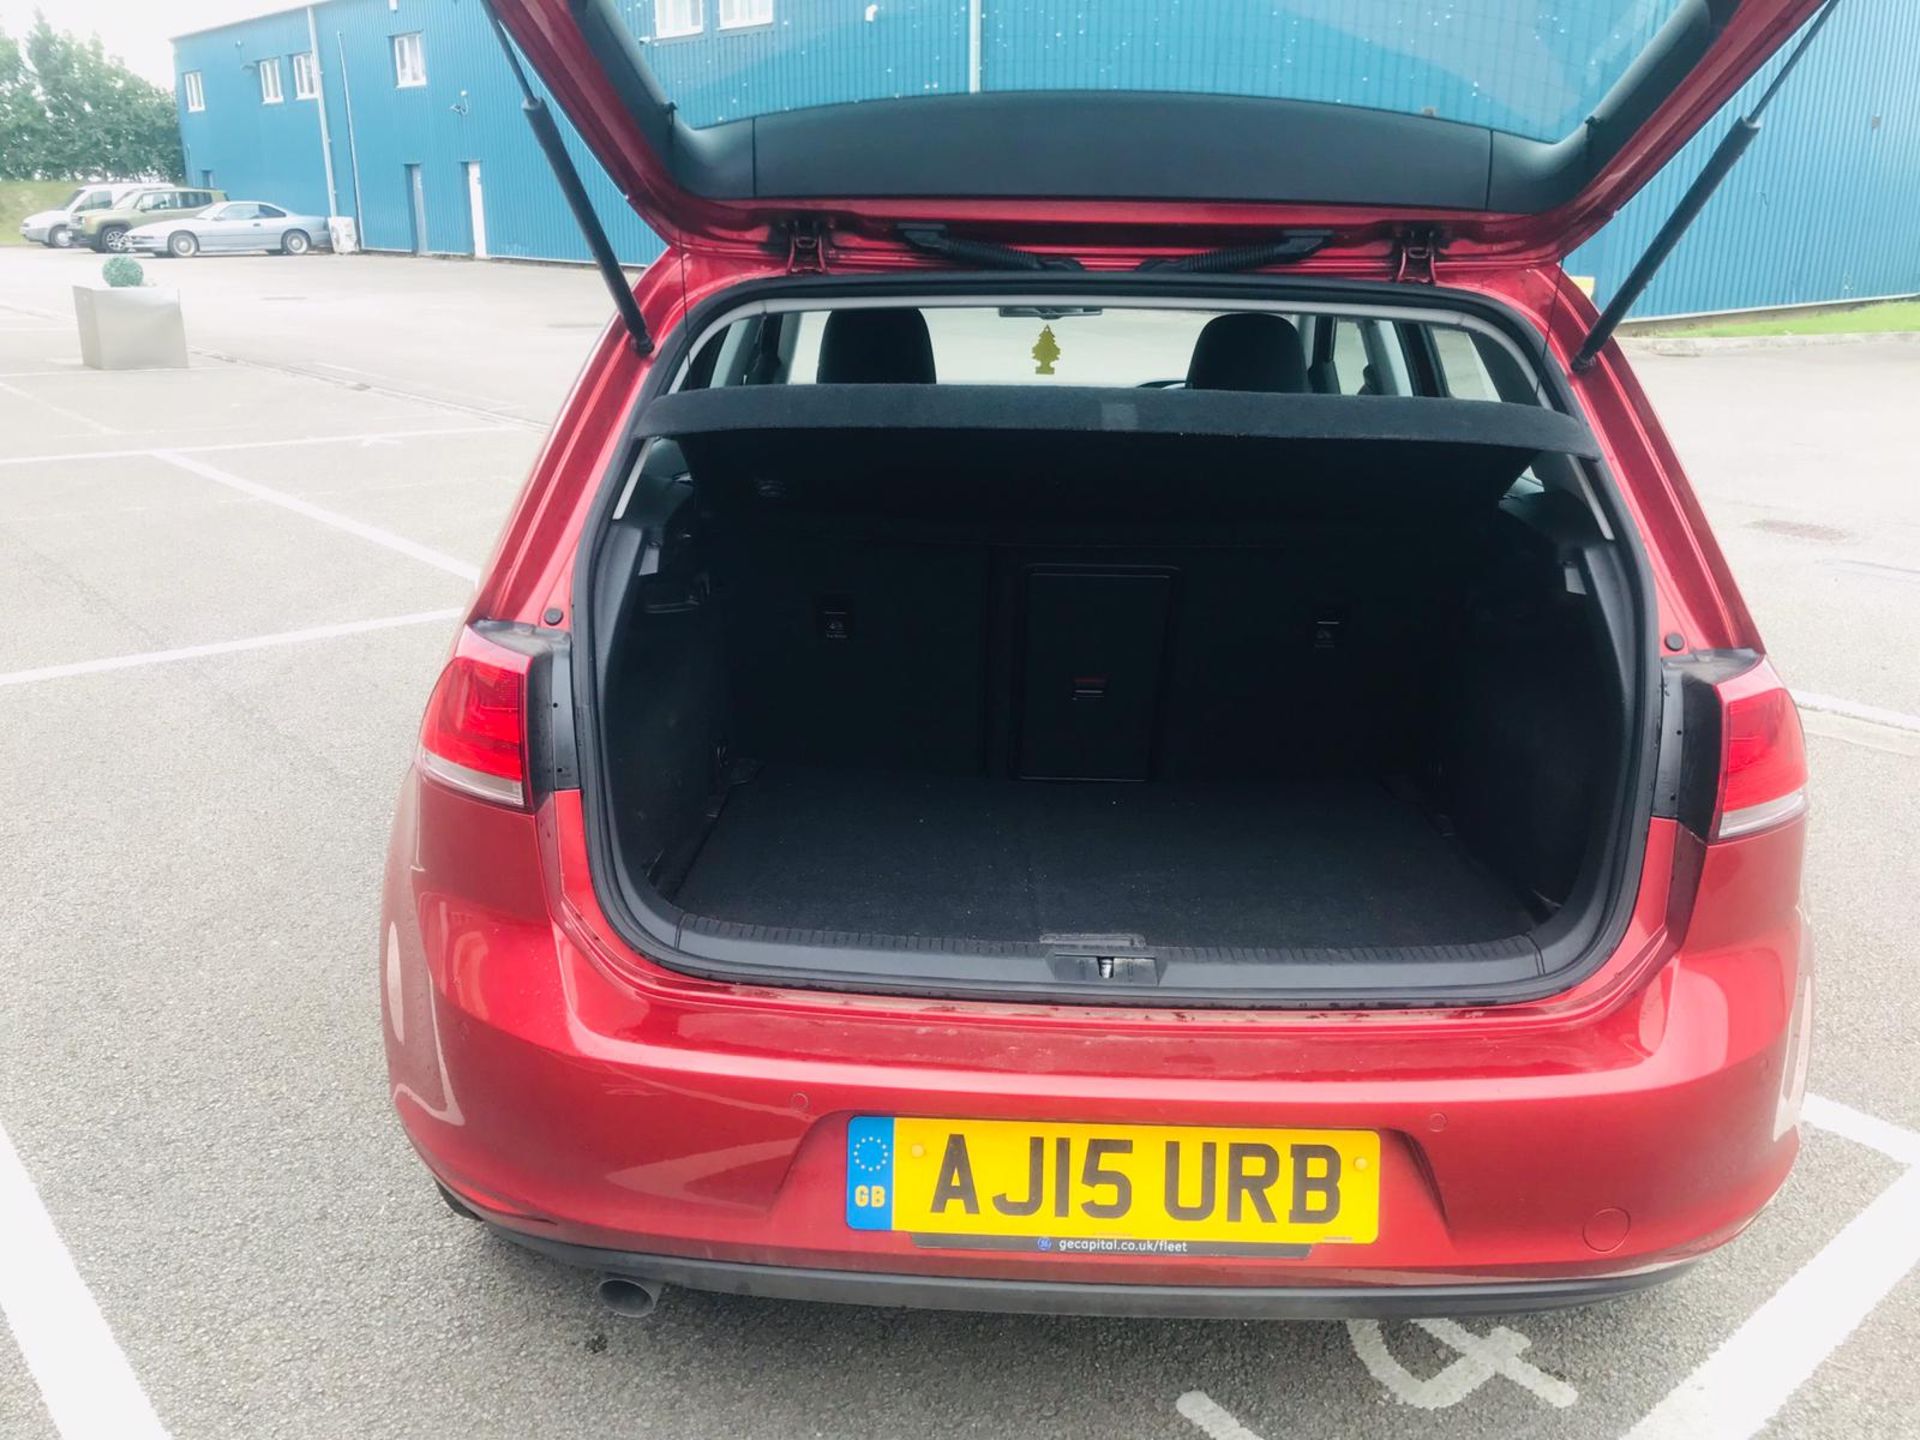 VW Golf Match 1.6 TDI BMT Automatic - 2015 15 Reg - 1 Keeper From New - Parking Sensors - Image 7 of 30